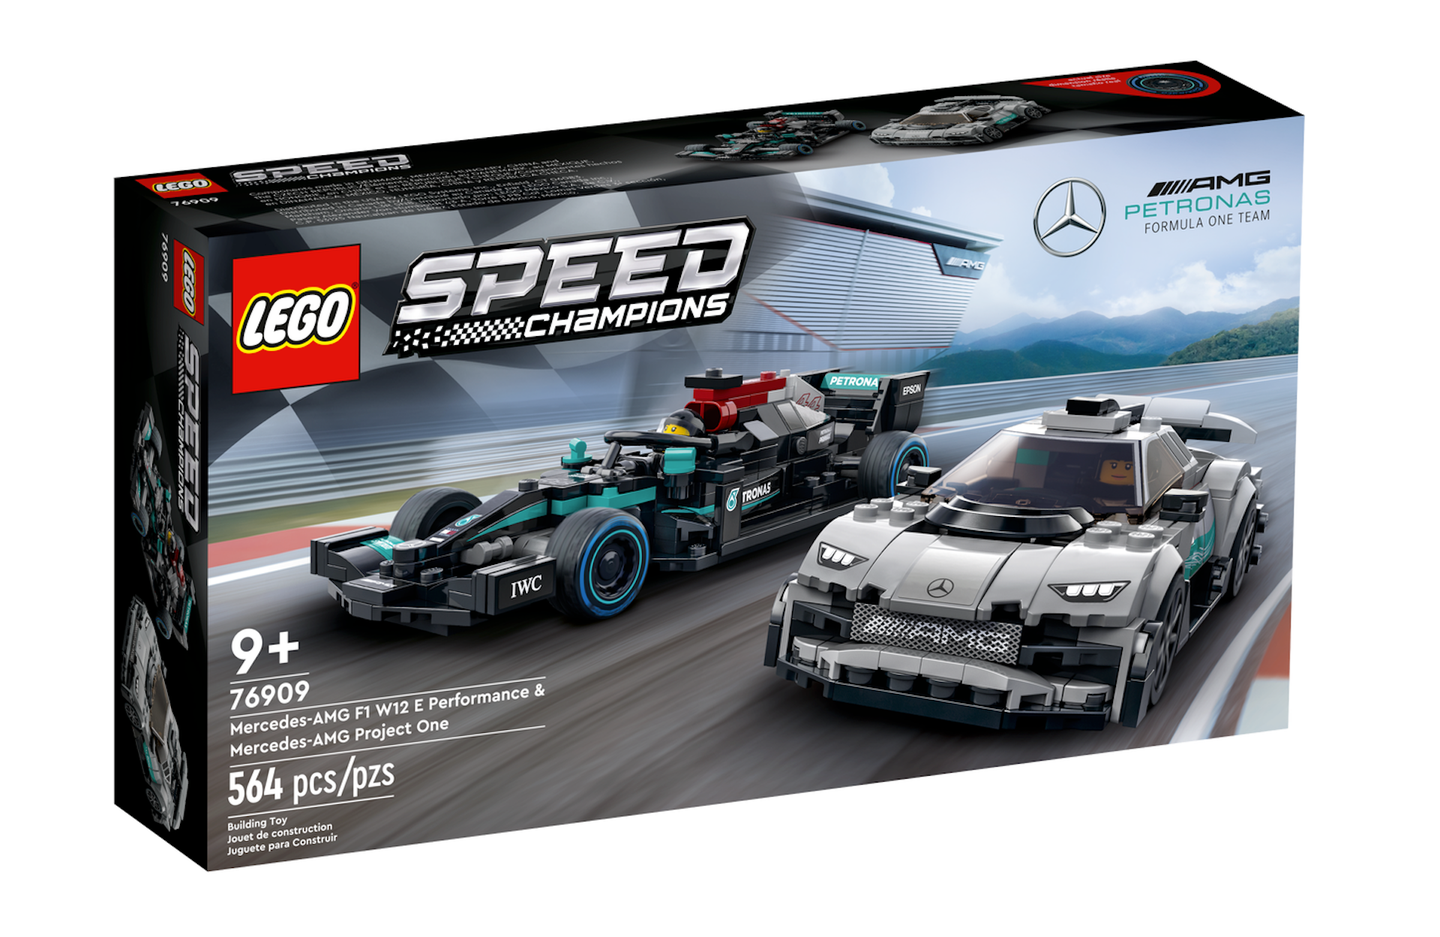 Lewis Hamilton's 2021 F1 Car Is Now Available As a